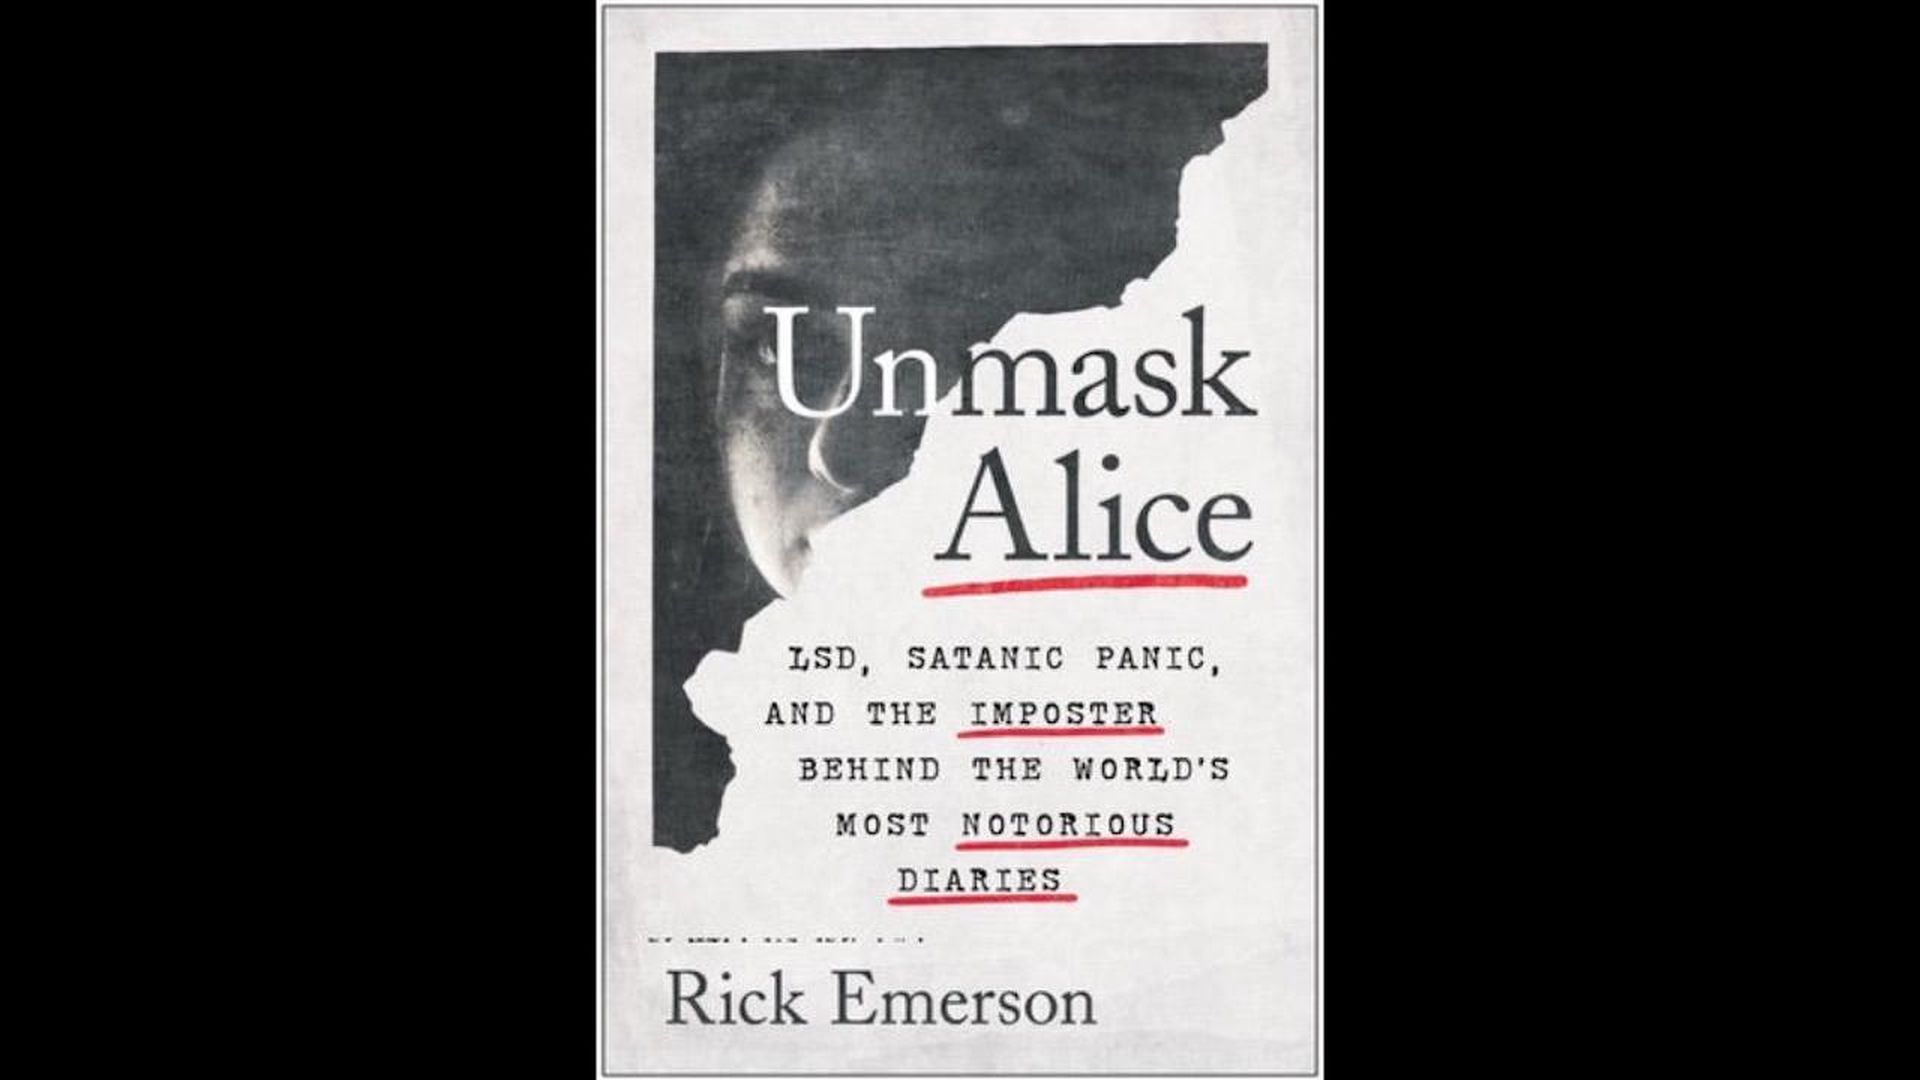 A book cover reads: Unmask Alice: LSD, satanic panic, and the imposter behind the world's most notorious diaries.